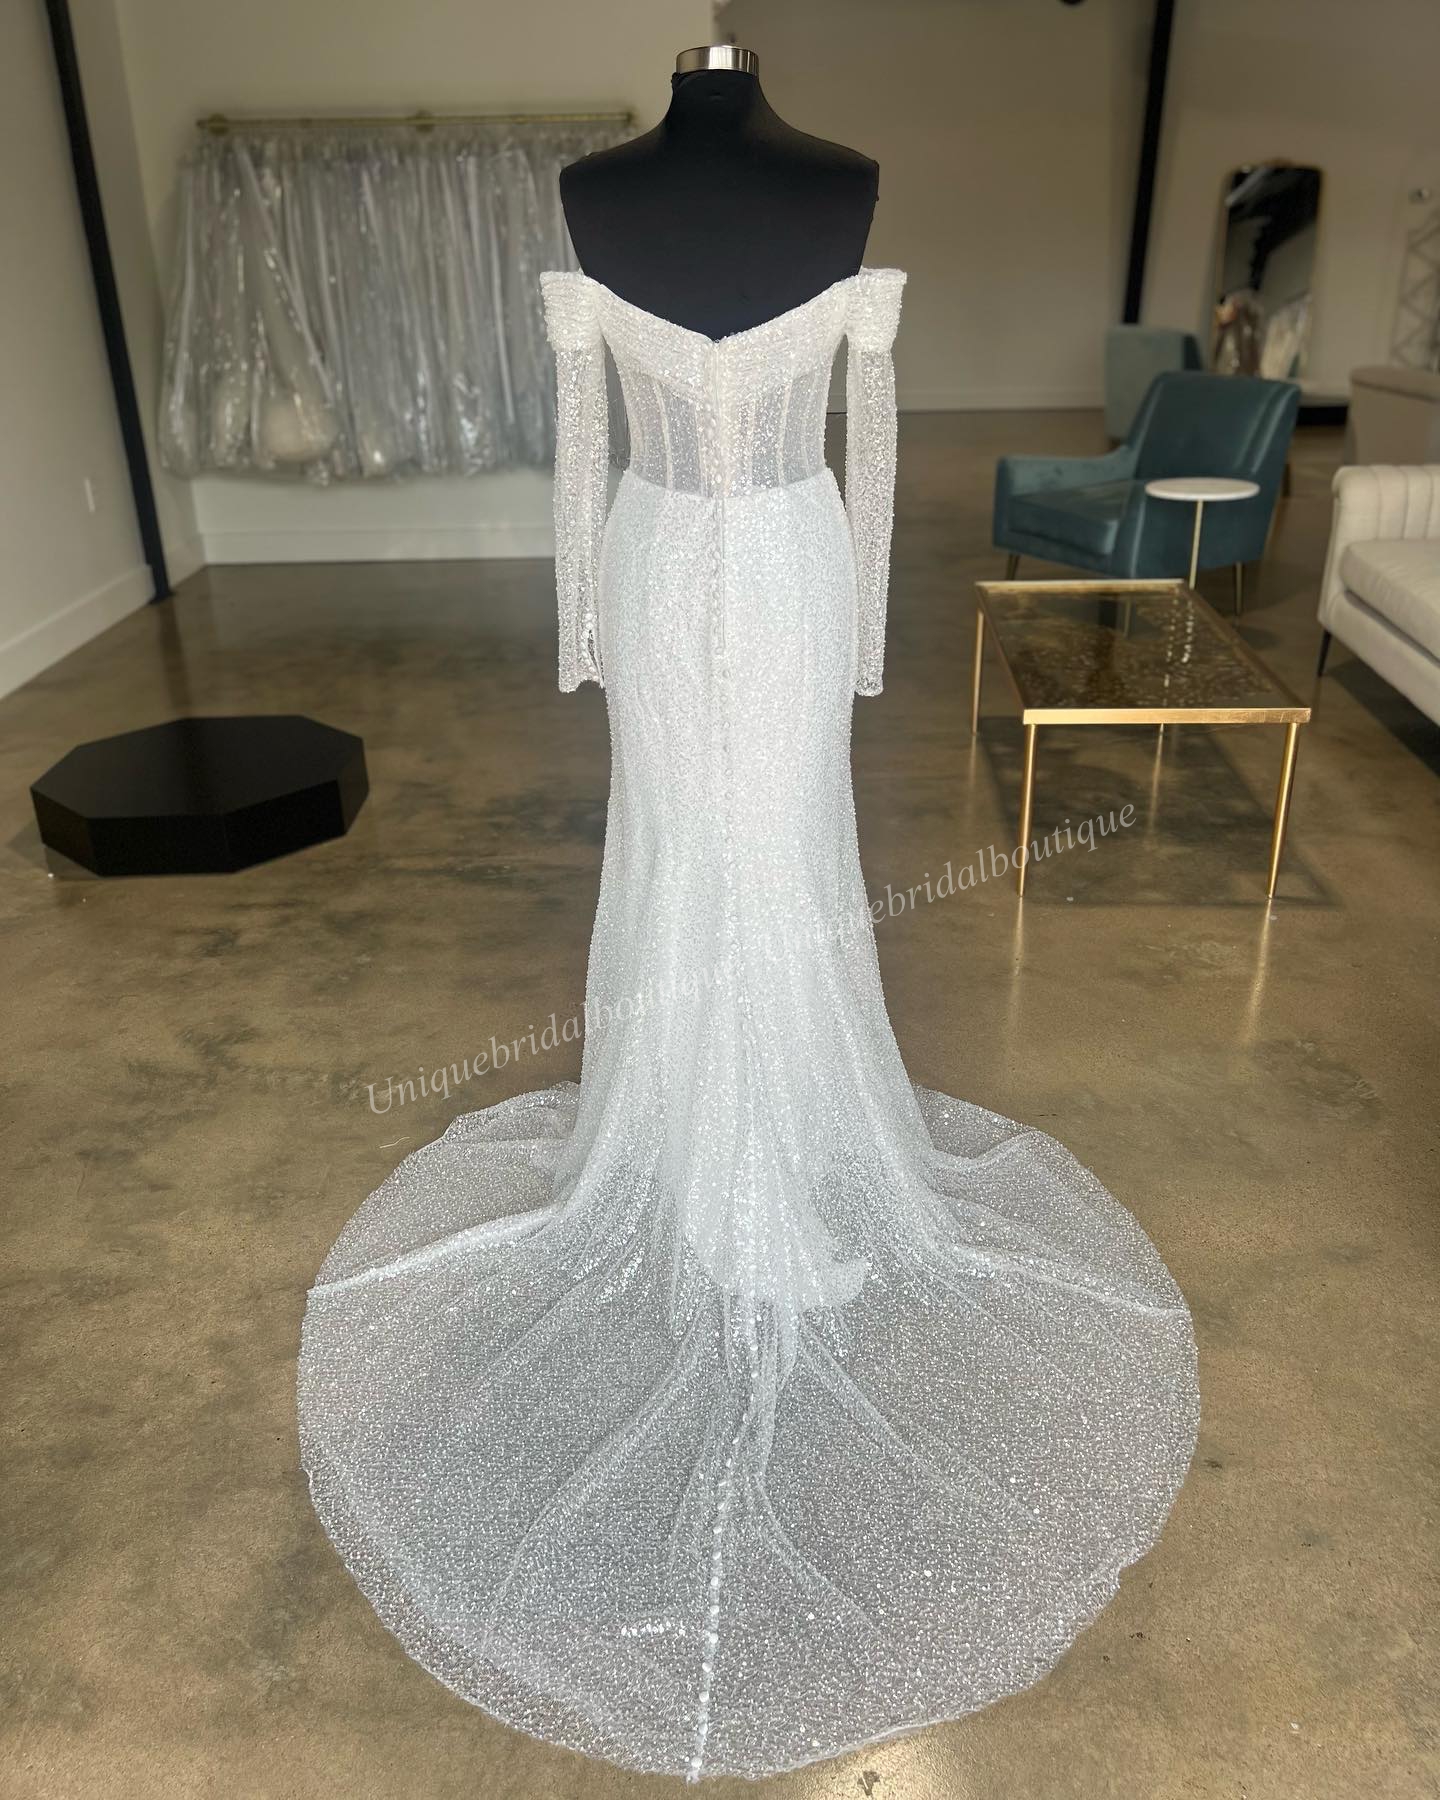 Illusion Wedding Dress Free Veil Fitted Corset Bridal Rehearsal Reception Engagement Party Bachelorette Elopement Hens Night Dance Gown for Bride Long Sleeves